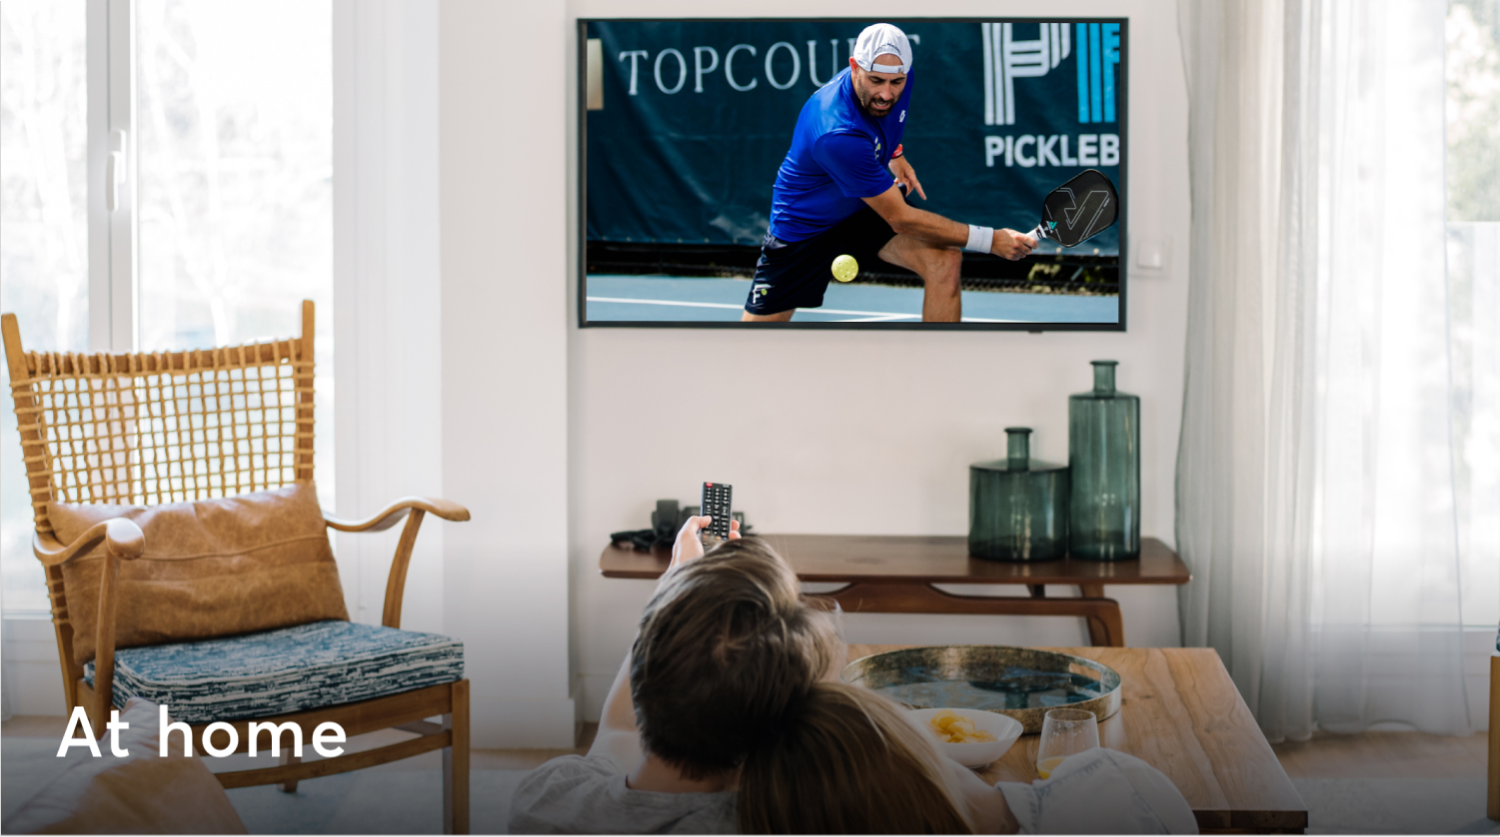 Pickleball at home